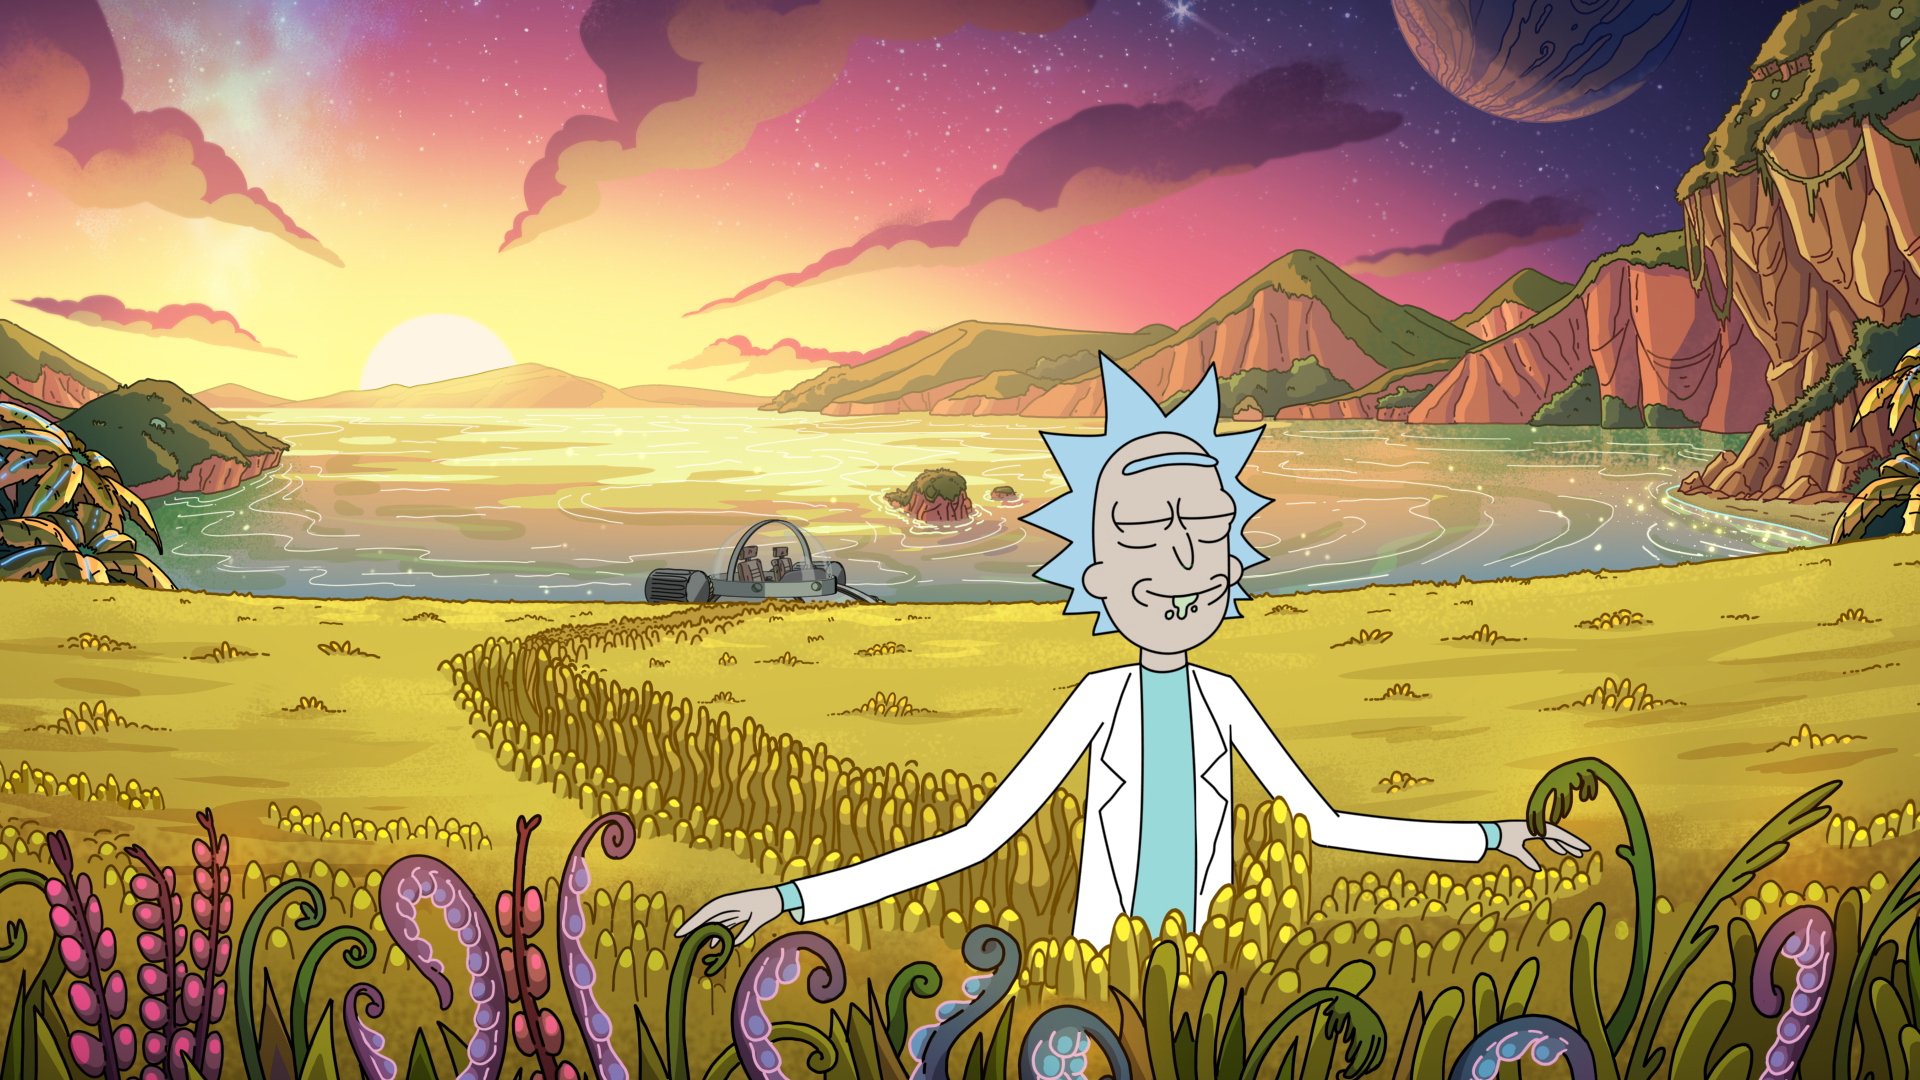 Rick Sanchez walking through a field with his eyes closed in ‘Rick and Morty’ Season 4